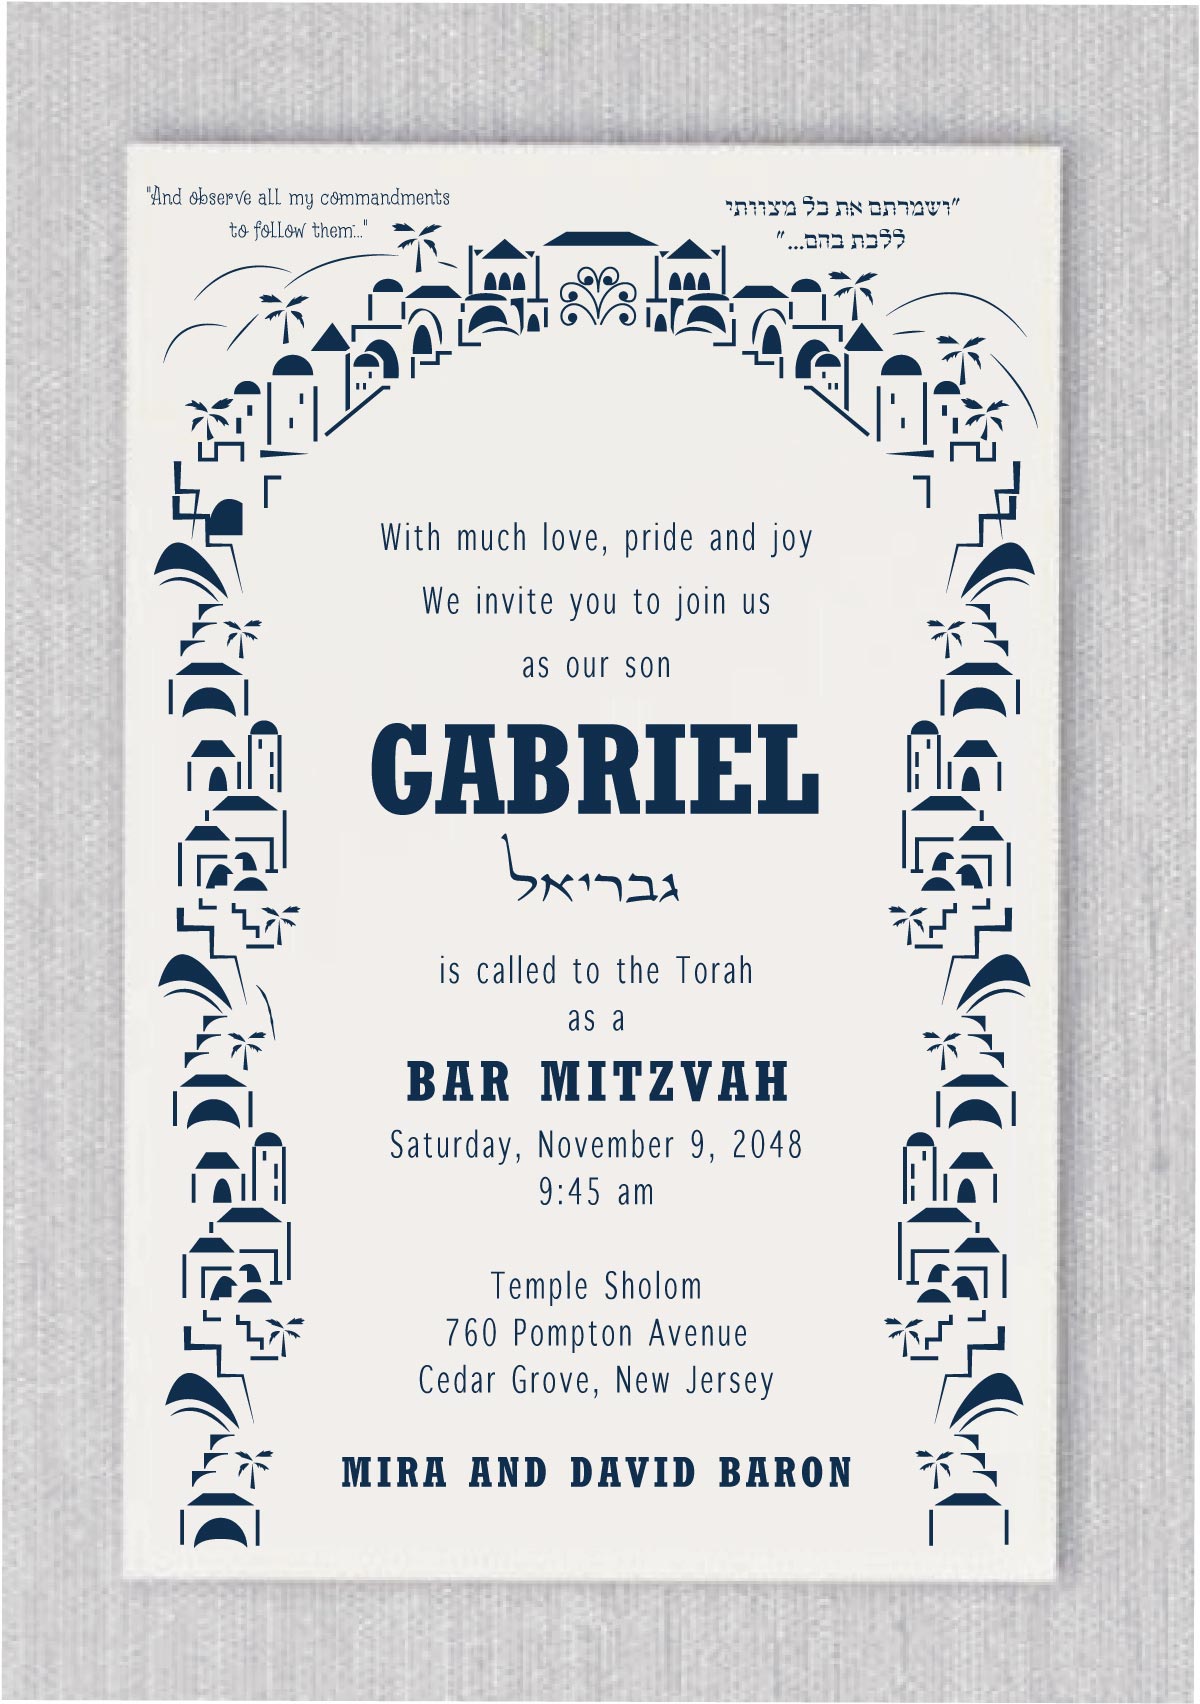 These Joy in Jerusalem – Bar Mitzvah Invitations are a beautiful representation of the Holy Land with an intricate etching border capturing the essence of Jerusalem in navy. The navy-printed, personalized text is elegantly placed within a Jerusalem frame on a 130lb. card stock for a truly stunning and memorable Bar Mitzvah invitation.